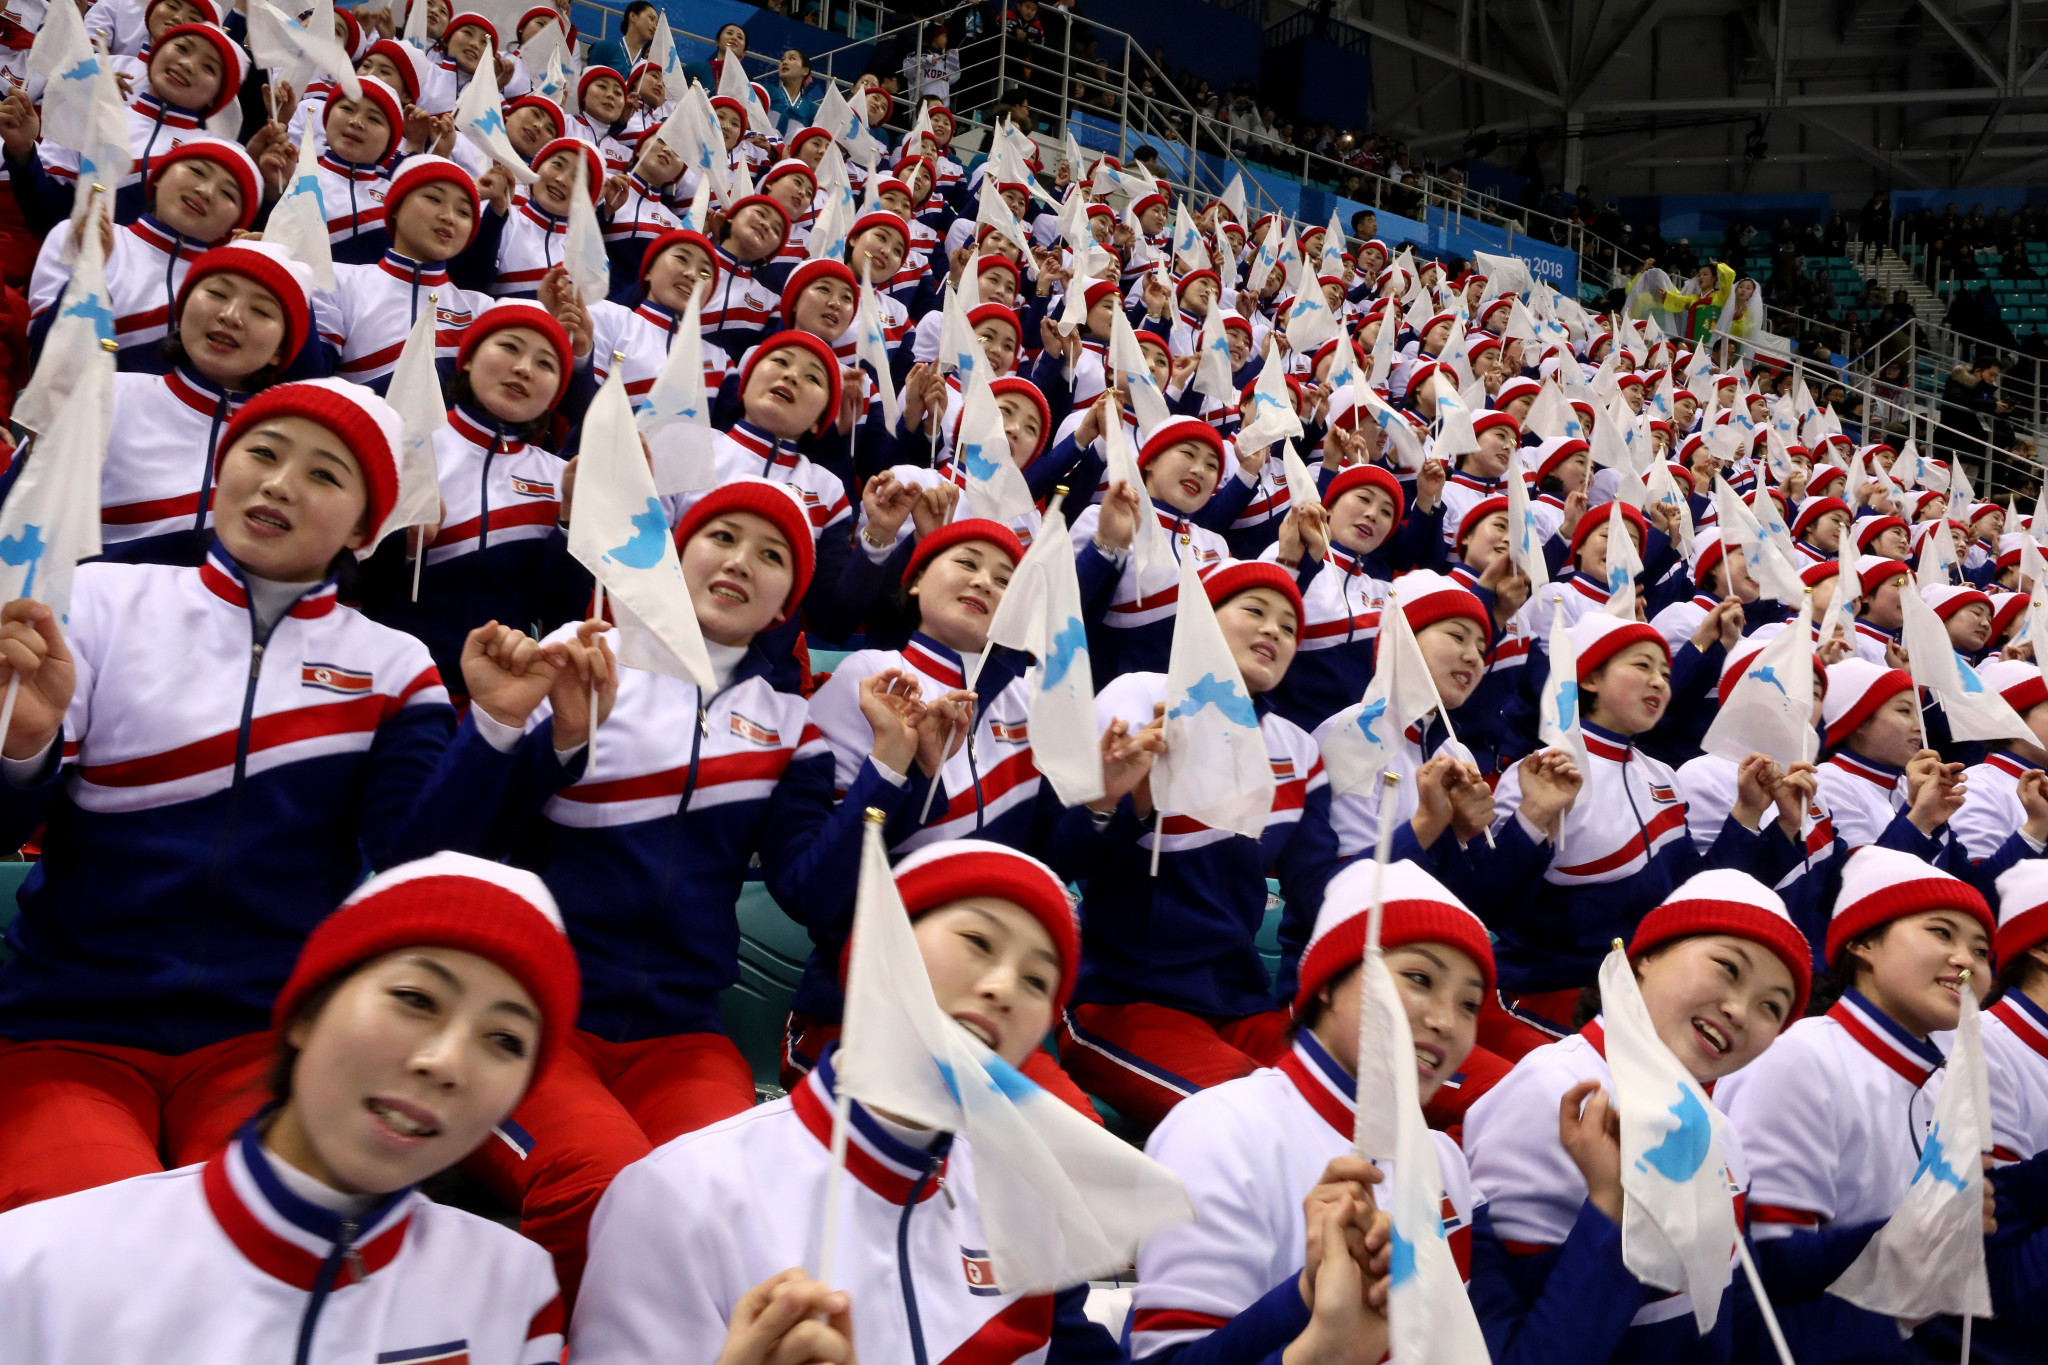 North Korean cheerleaders captured the world's attention during the 2018 Winter Olympic Games in Pyeongchang ©Getty Images